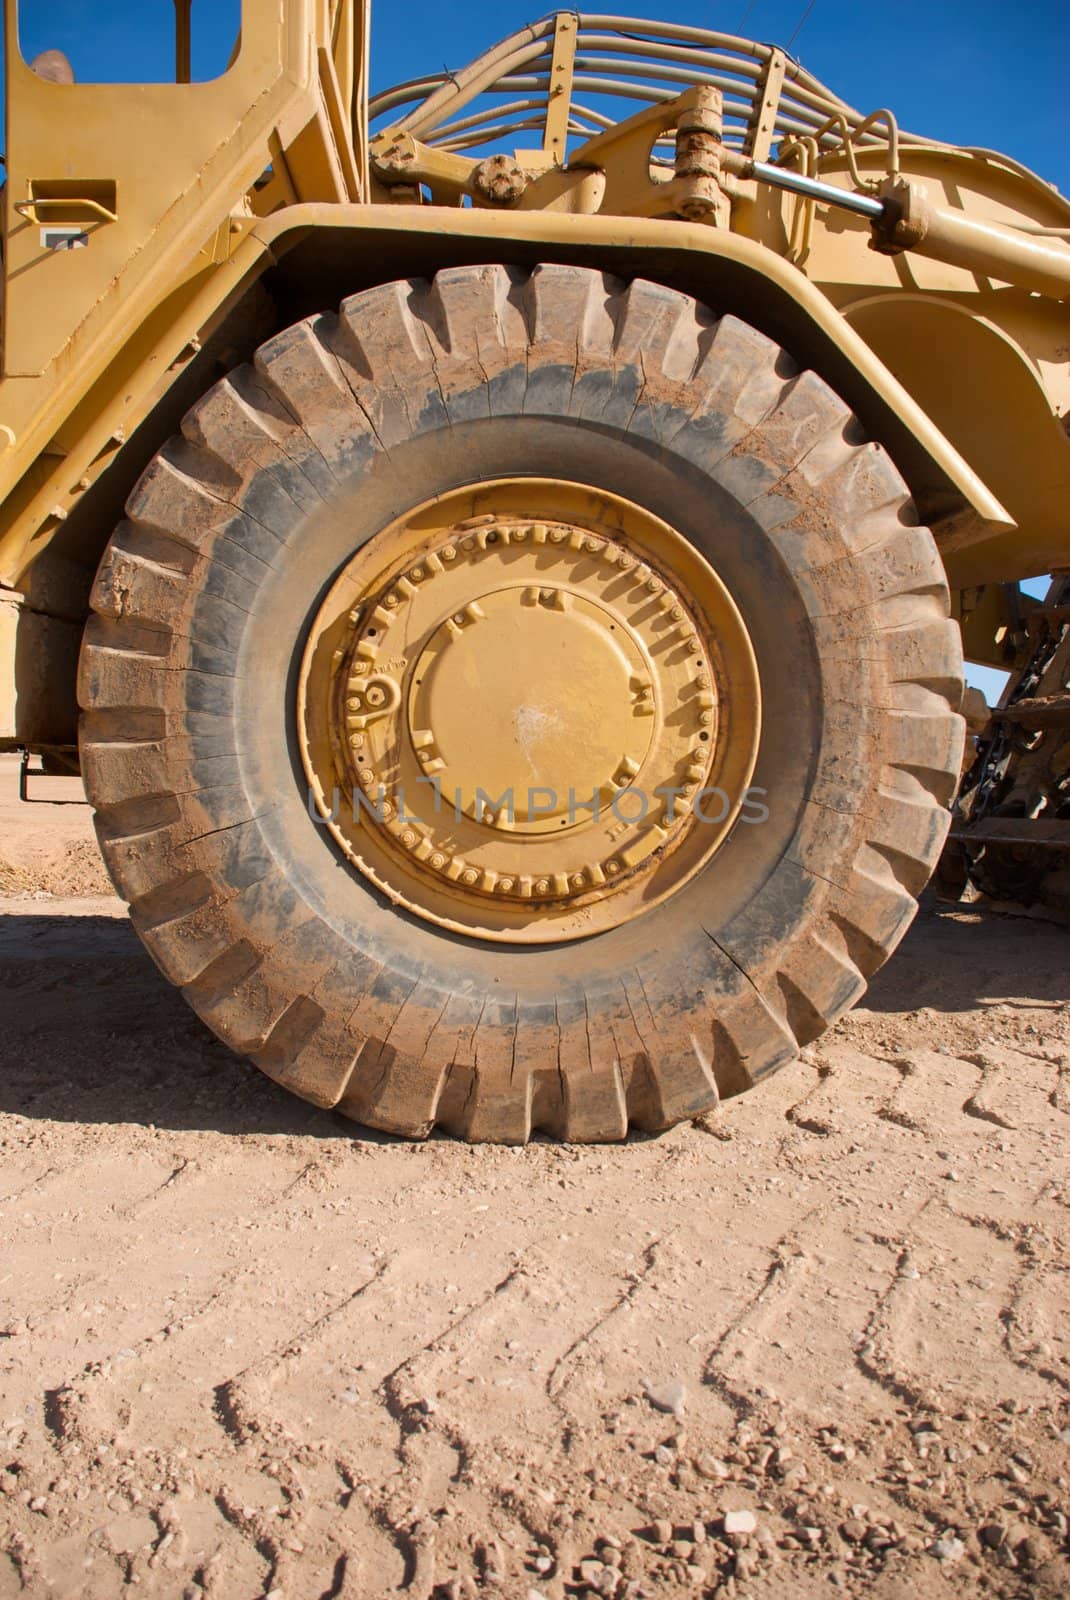 Earth Mover Tire by pixelsnap